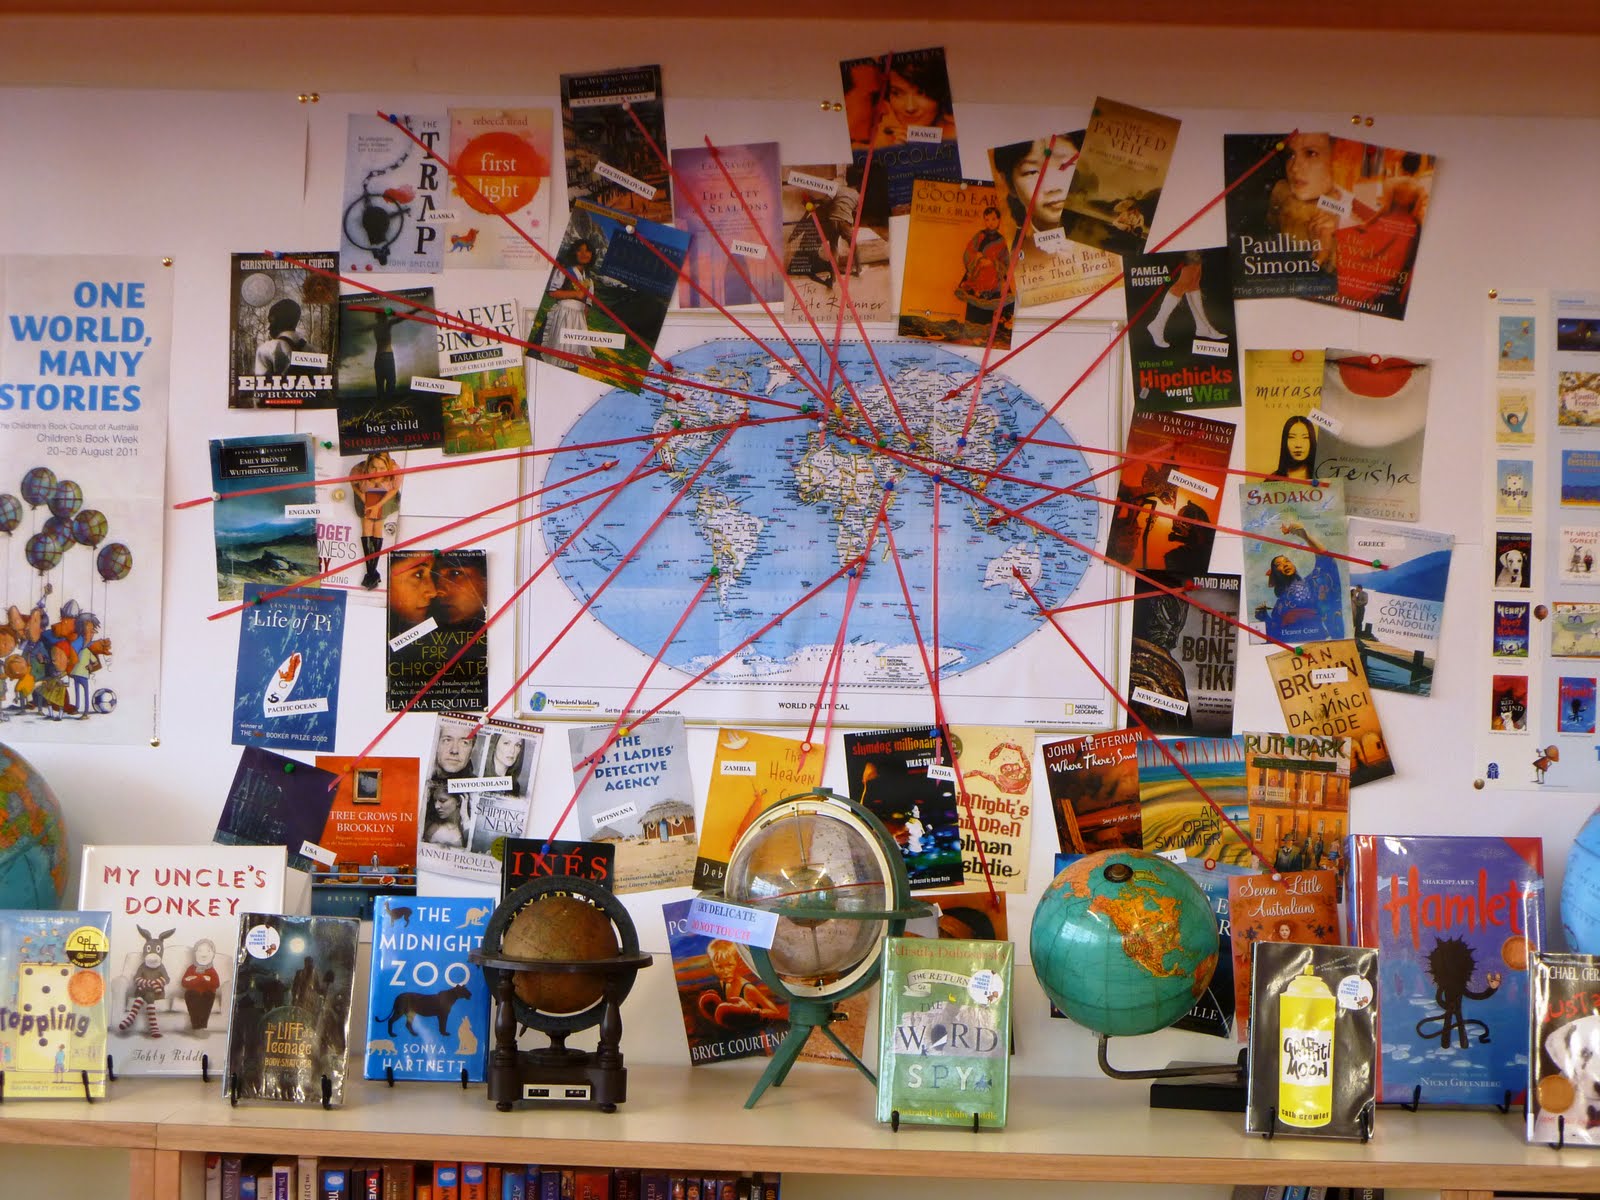 Library Displays One World, Many Stories